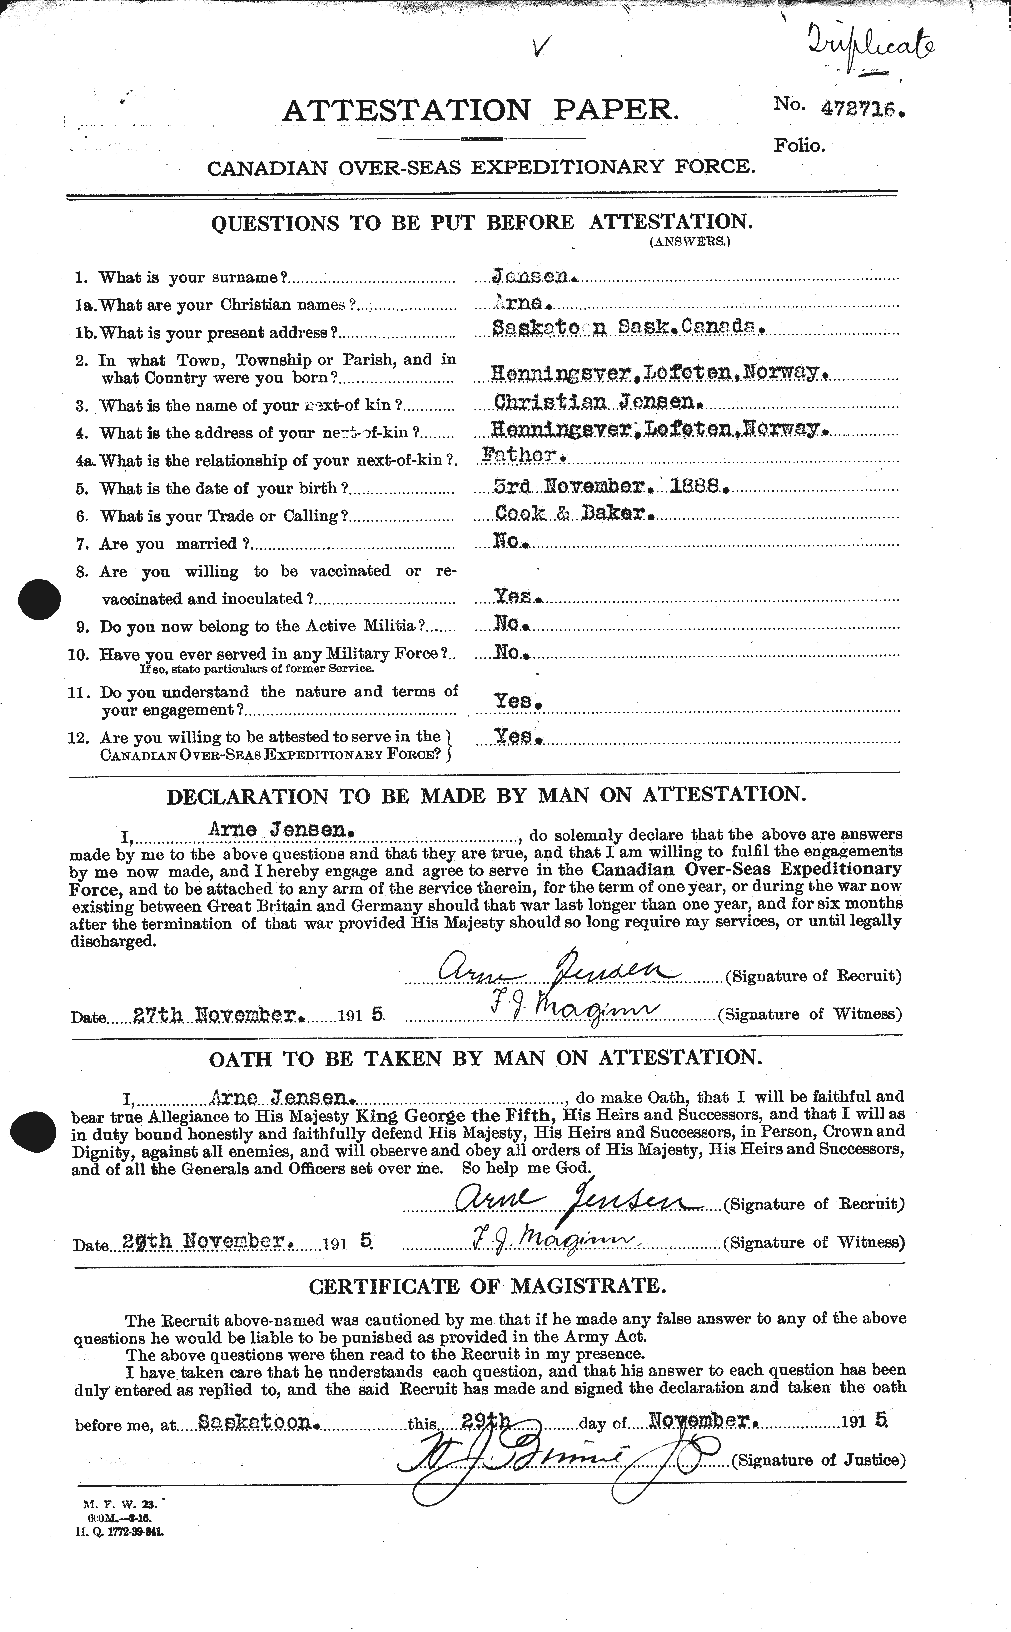 Personnel Records of the First World War - CEF 421541a